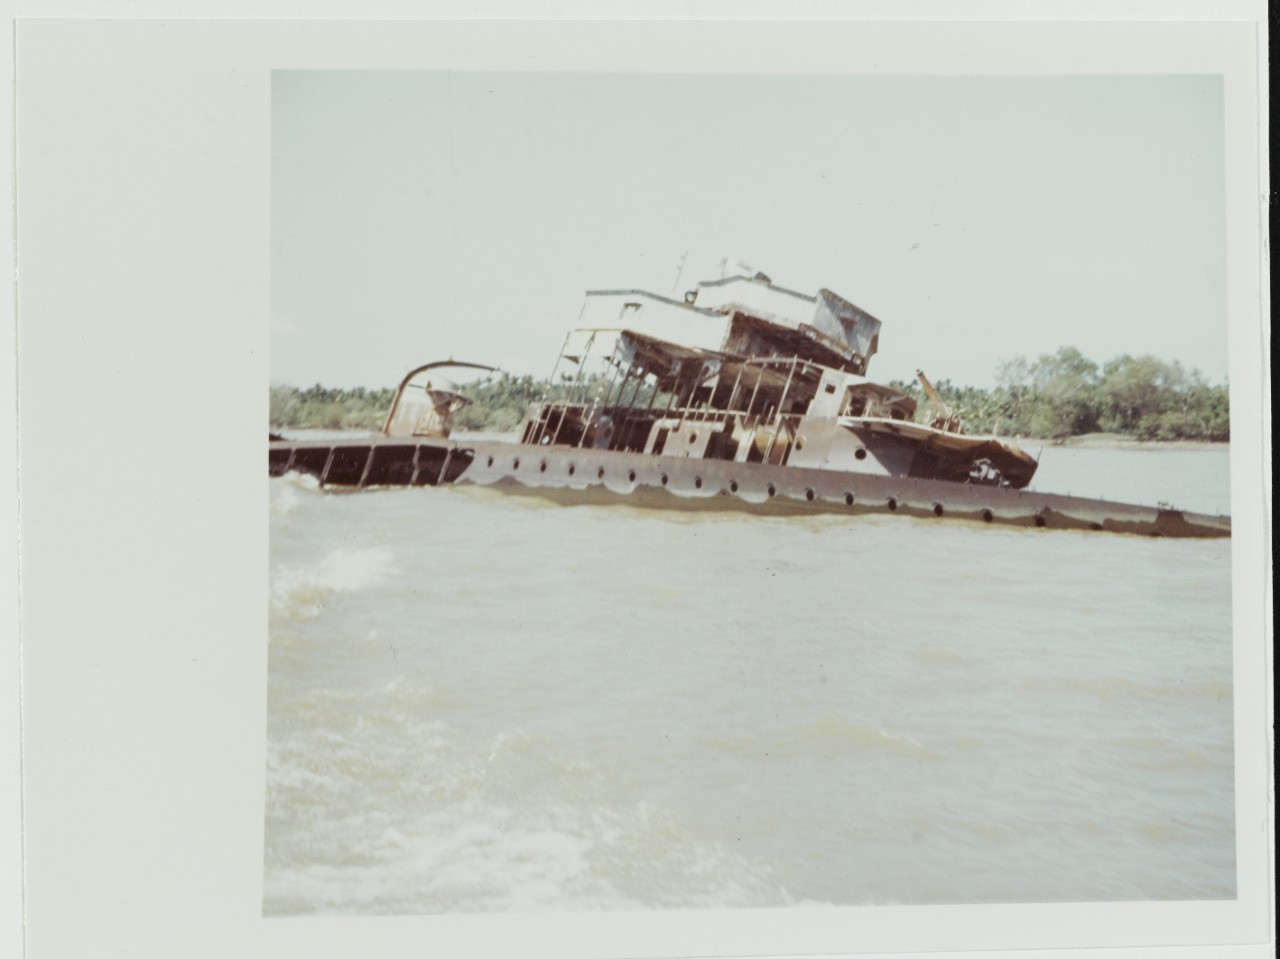 ADMIRAL CHARNER (French Colonial Sloop, 1932-1945). Ship's wreck photographed in South Vietnam, circa February-March 1967